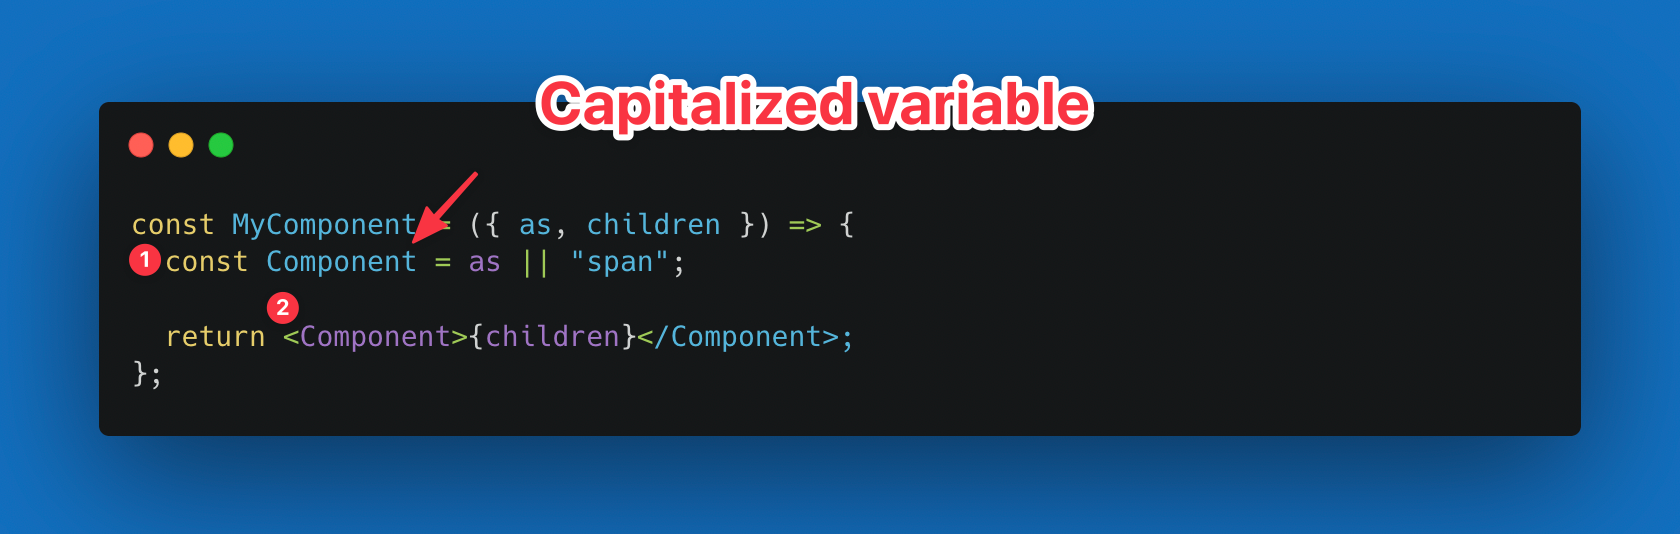 Using a capitlized variable